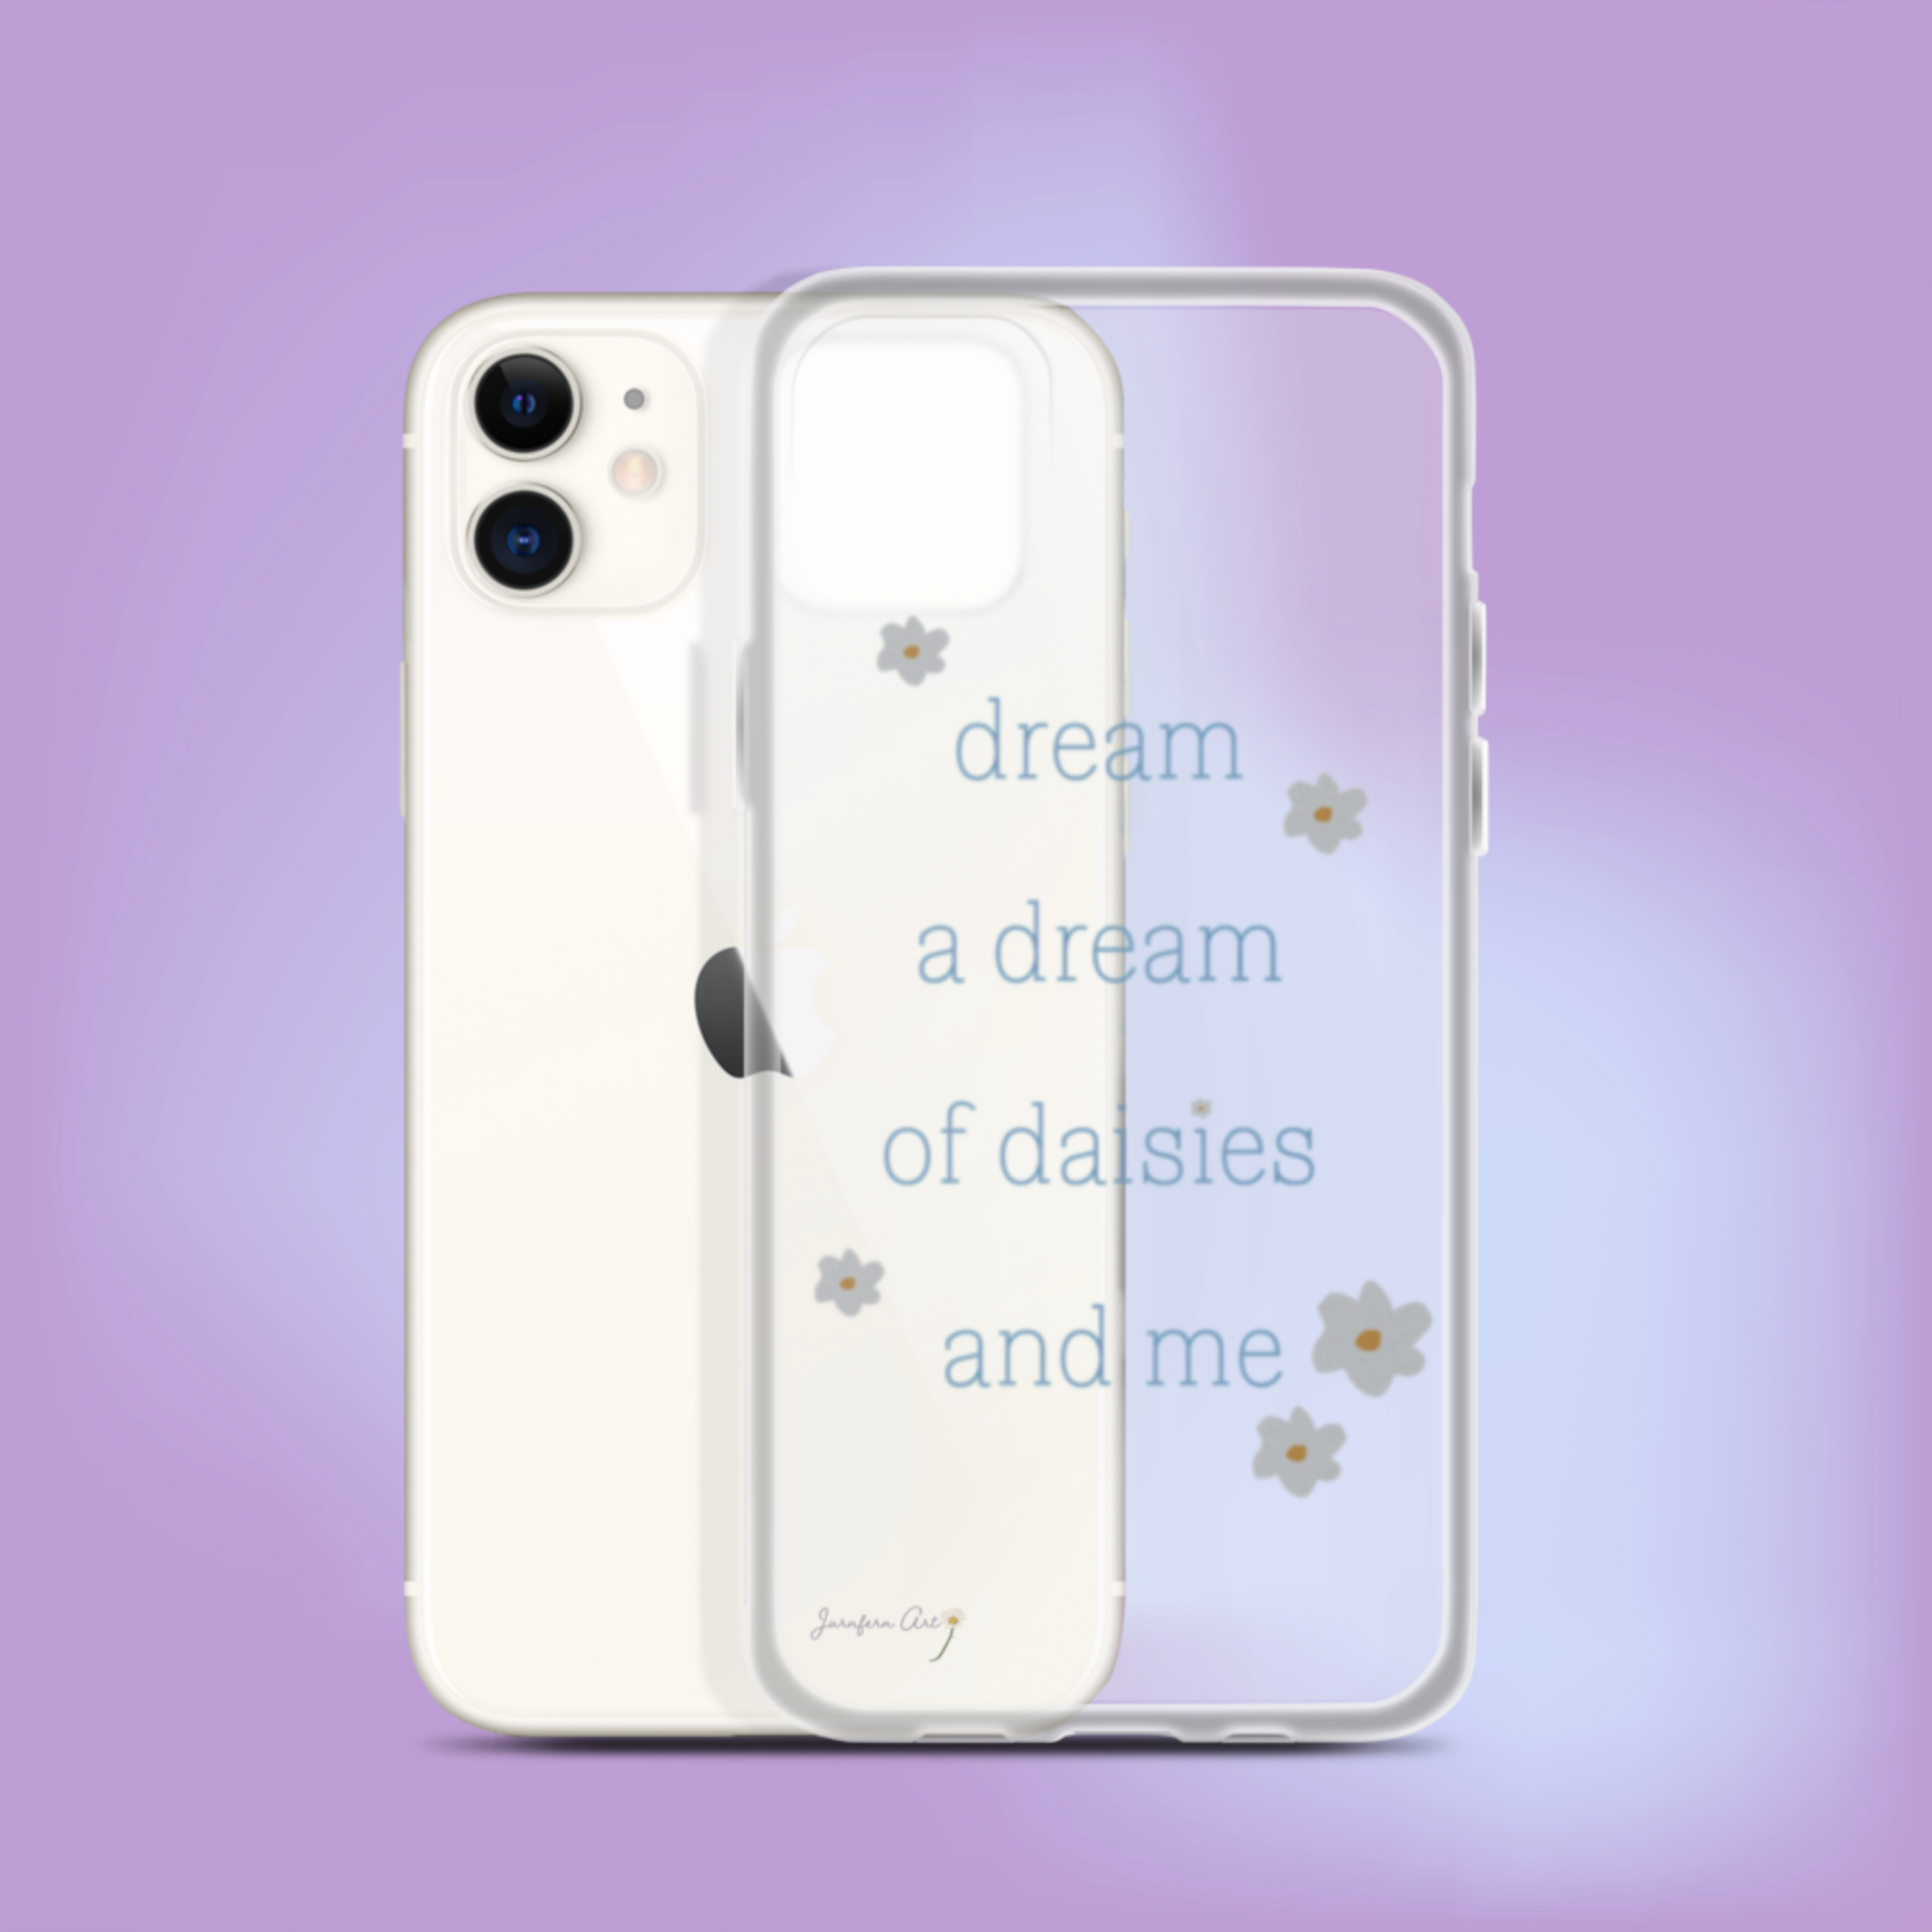 A transparent iPhone 11 case with blue text on it that reads "dream a dream of daisies and me" surrounded by small daisies